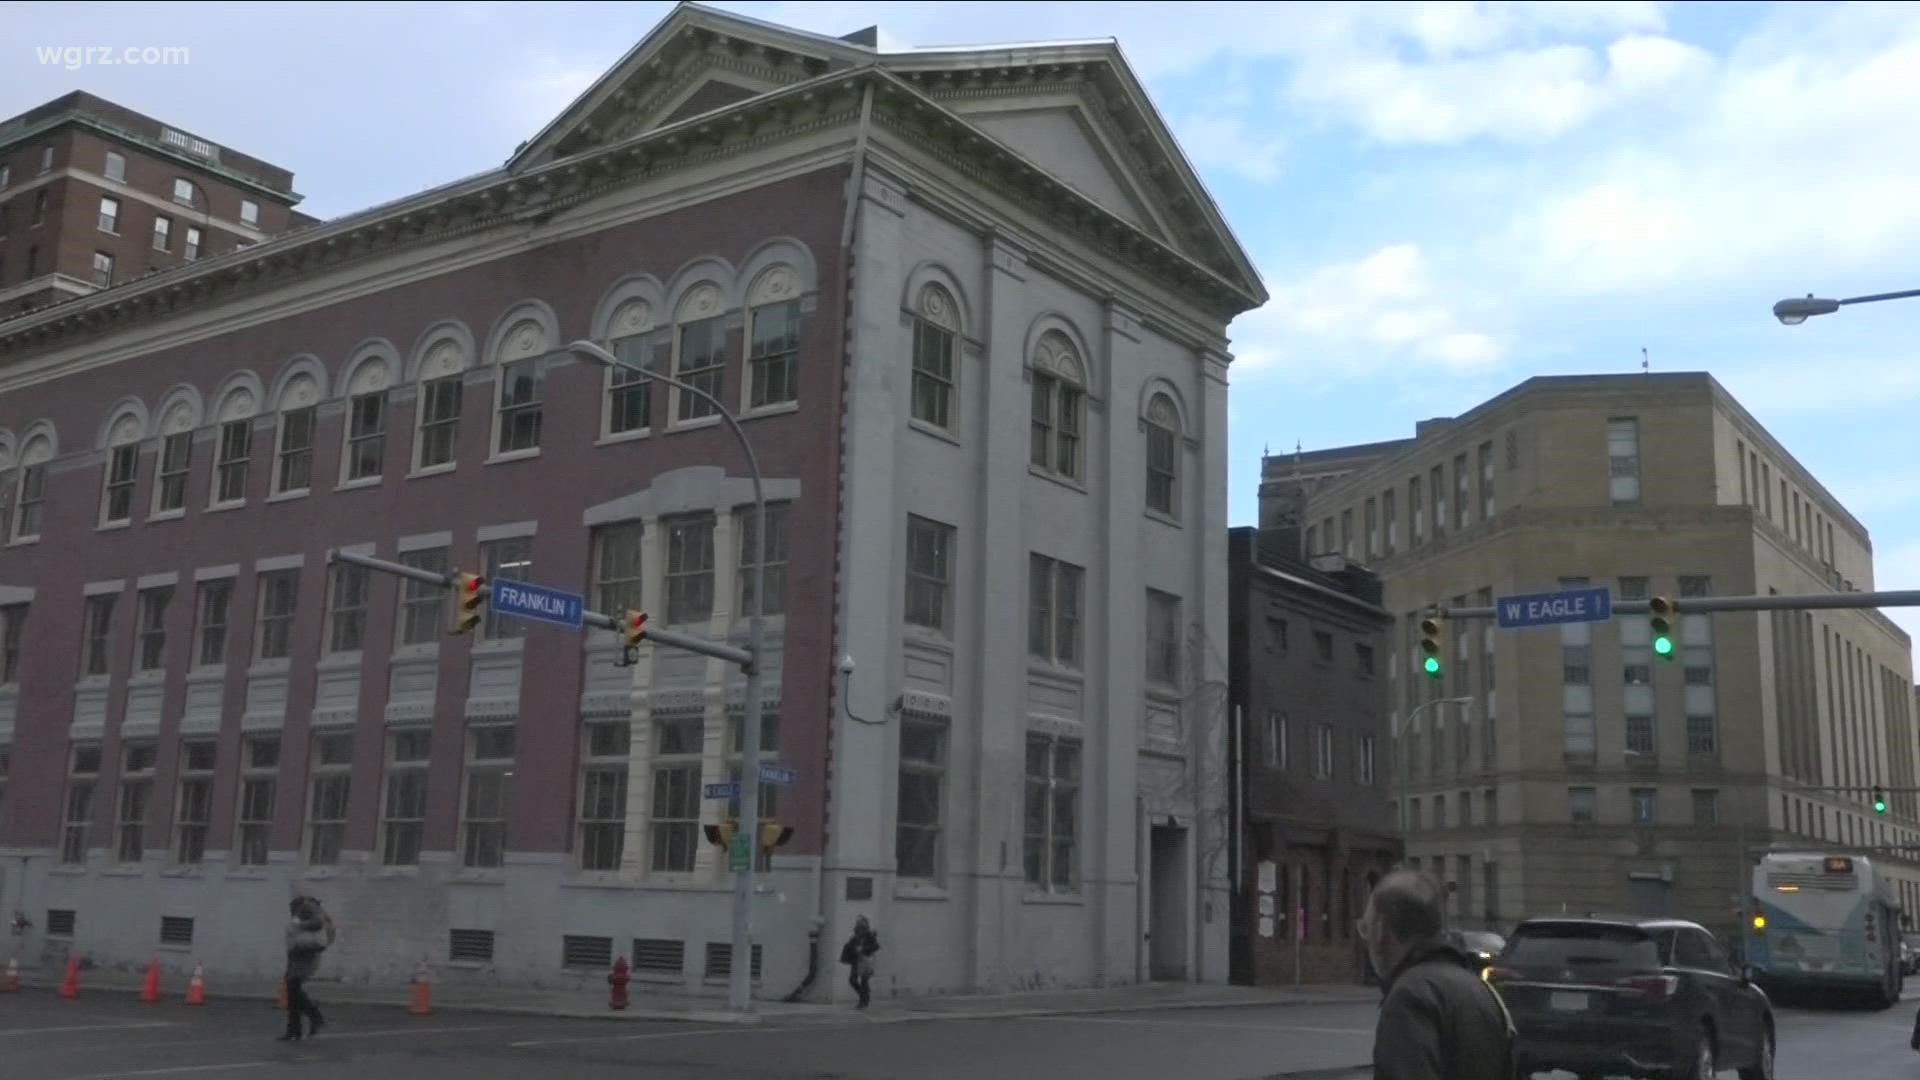 Erie County used Covid funds to transform a 189 year old building which once hosted John Quincy Adams, Abraham Lincoln and Millard Fillmore into its new health hub.